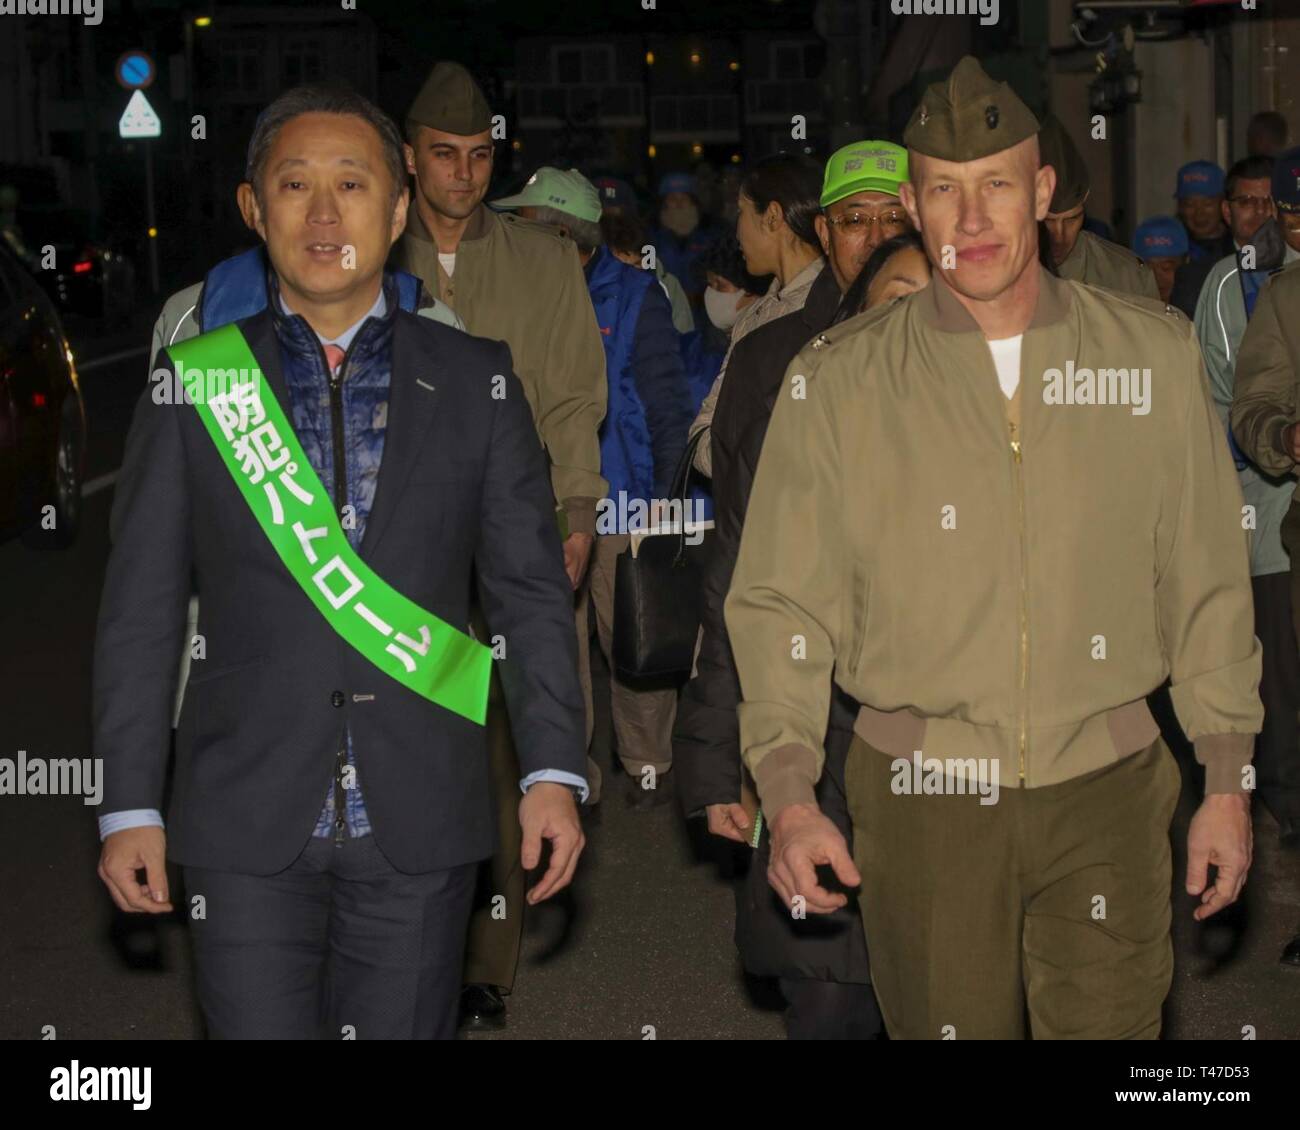 Yoshihiko Fukuda, left, the mayor of Iwakuni City, and U.S. Marine Corps Col. Richard Fuerst, commanding officer of Marine Corps Air Station Iwakuni, participate in the 10th Joint Leadership Walk in Iwakuni City, March 15, 2019. The walk consisted of touring popular local areas where they spoke to business owners as well as Japanese and American customers. Stock Photo